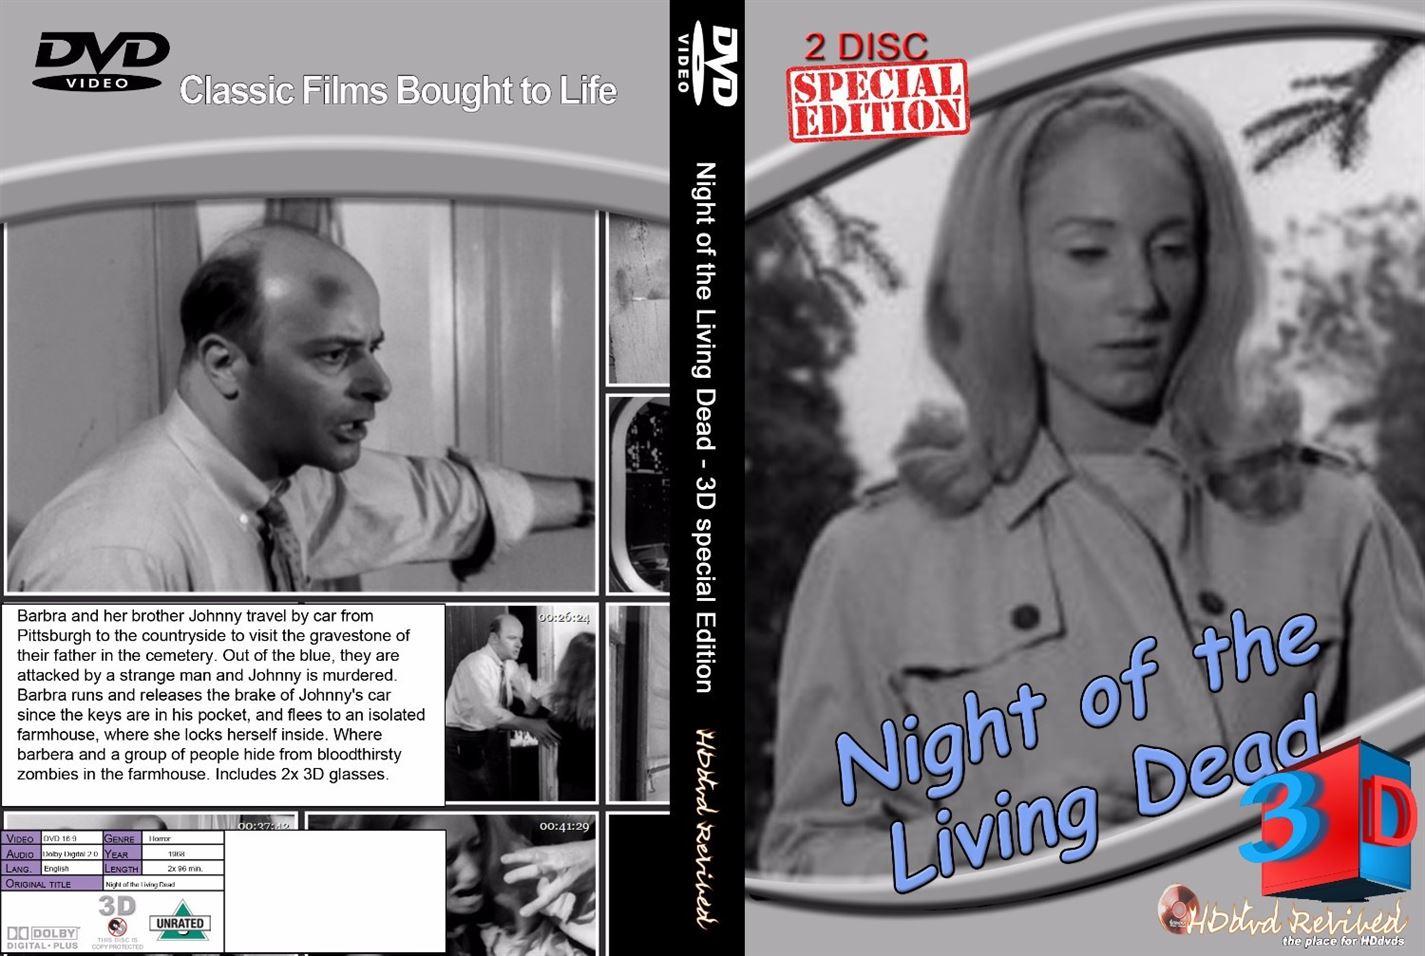 Night Of The Living Dead (1968) 3D Special Edition - DVD - (HDDVD-Revived) - NEW - UK SELLER